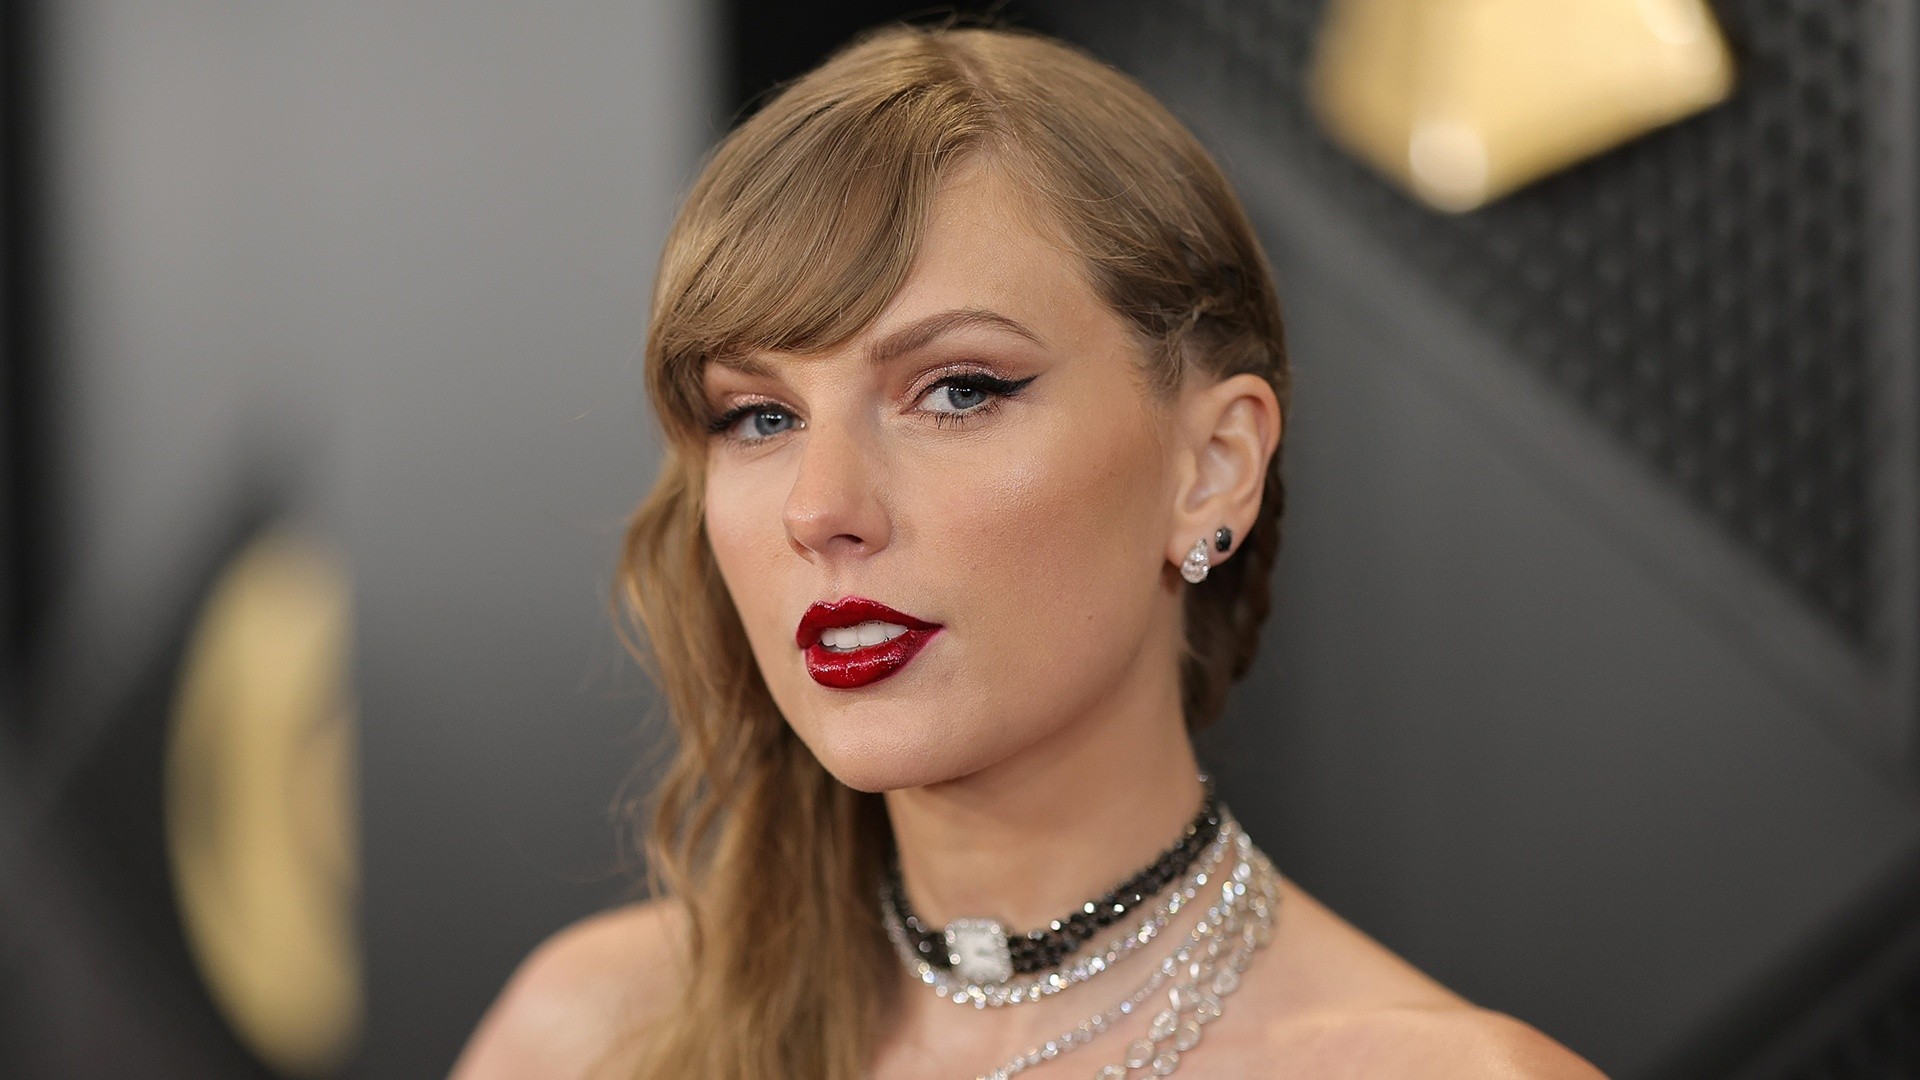 Book about Taylor Swift's impact on music is in the works